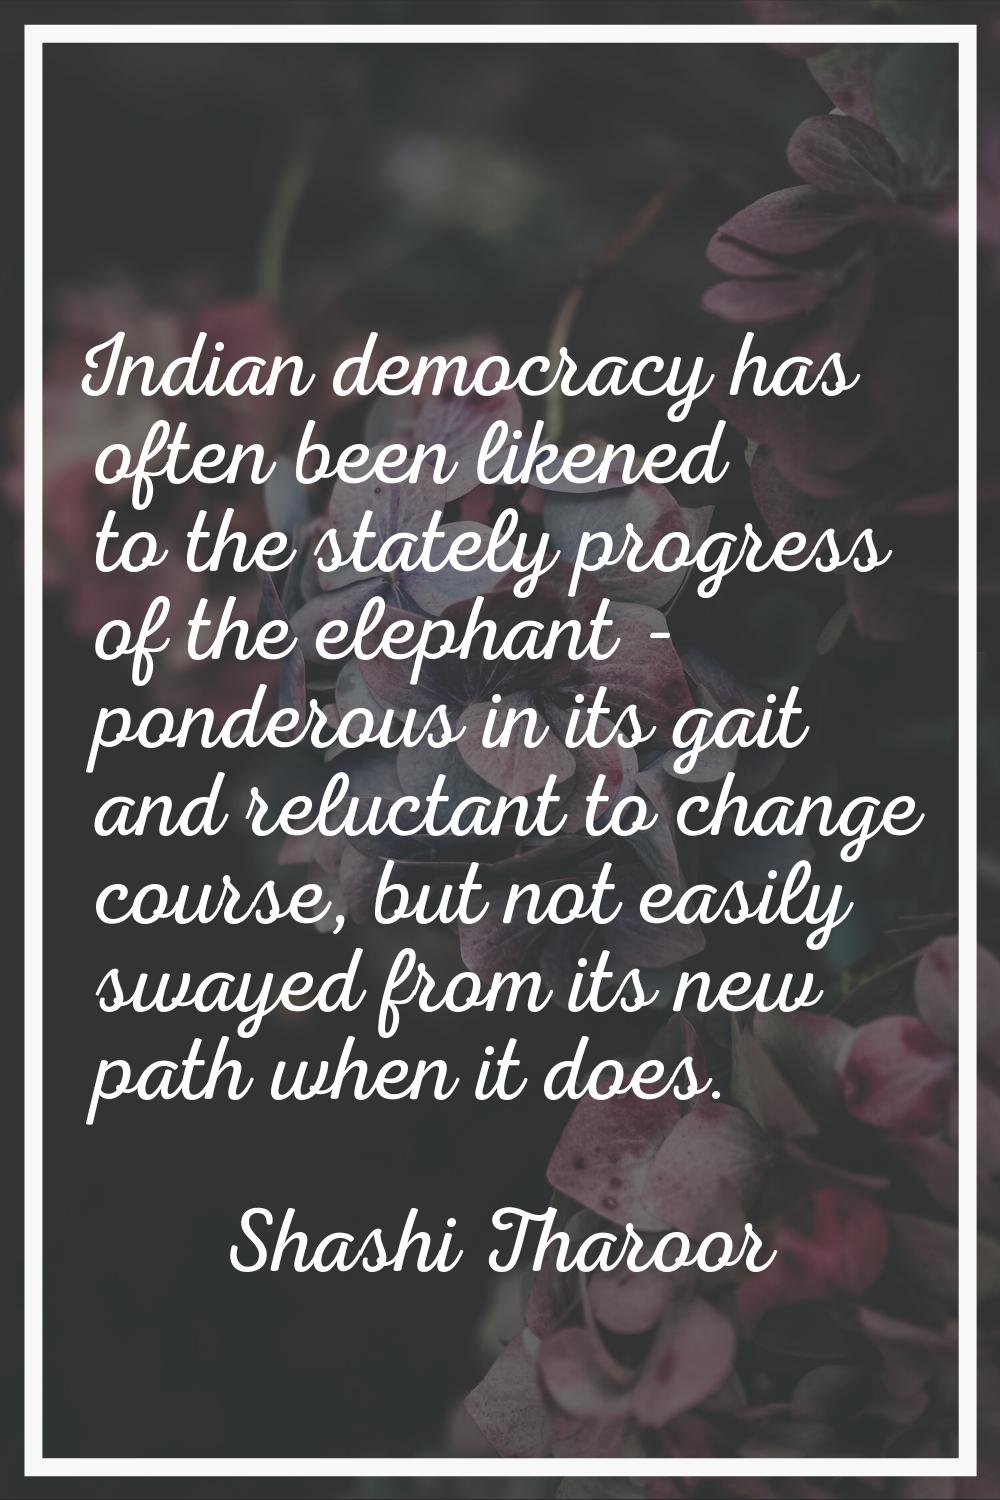 Indian democracy has often been likened to the stately progress of the elephant - ponderous in its 